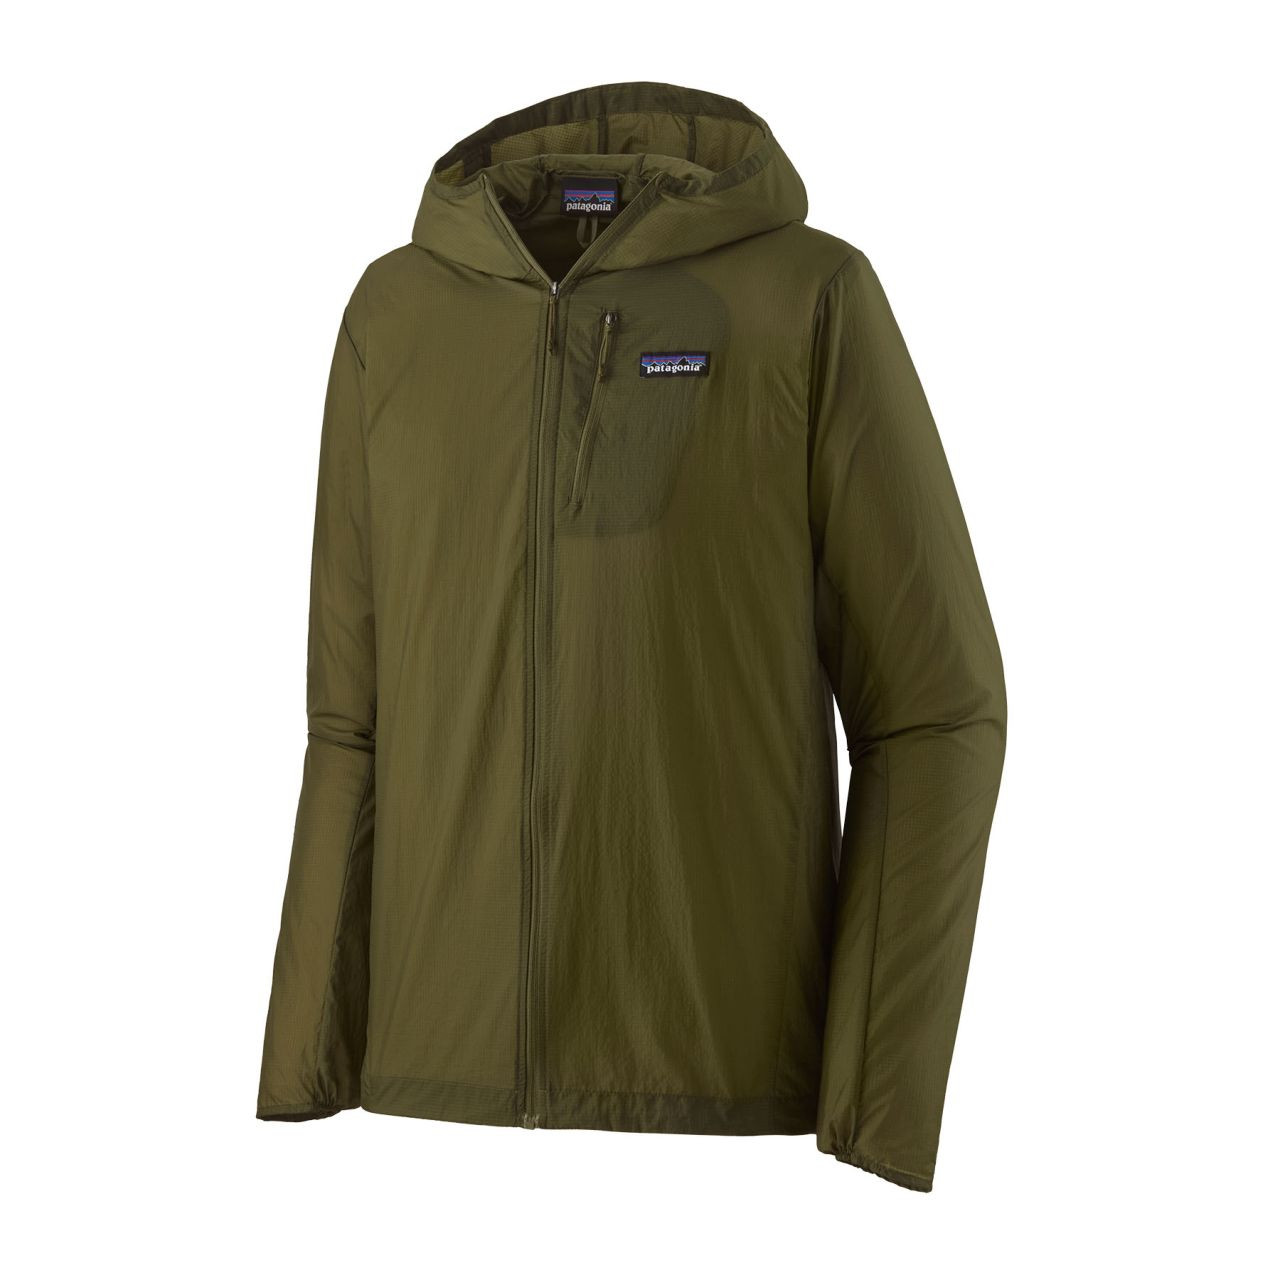 Patagonia's Houdini Jacket Is On Sale for as Low as $65 - Men's